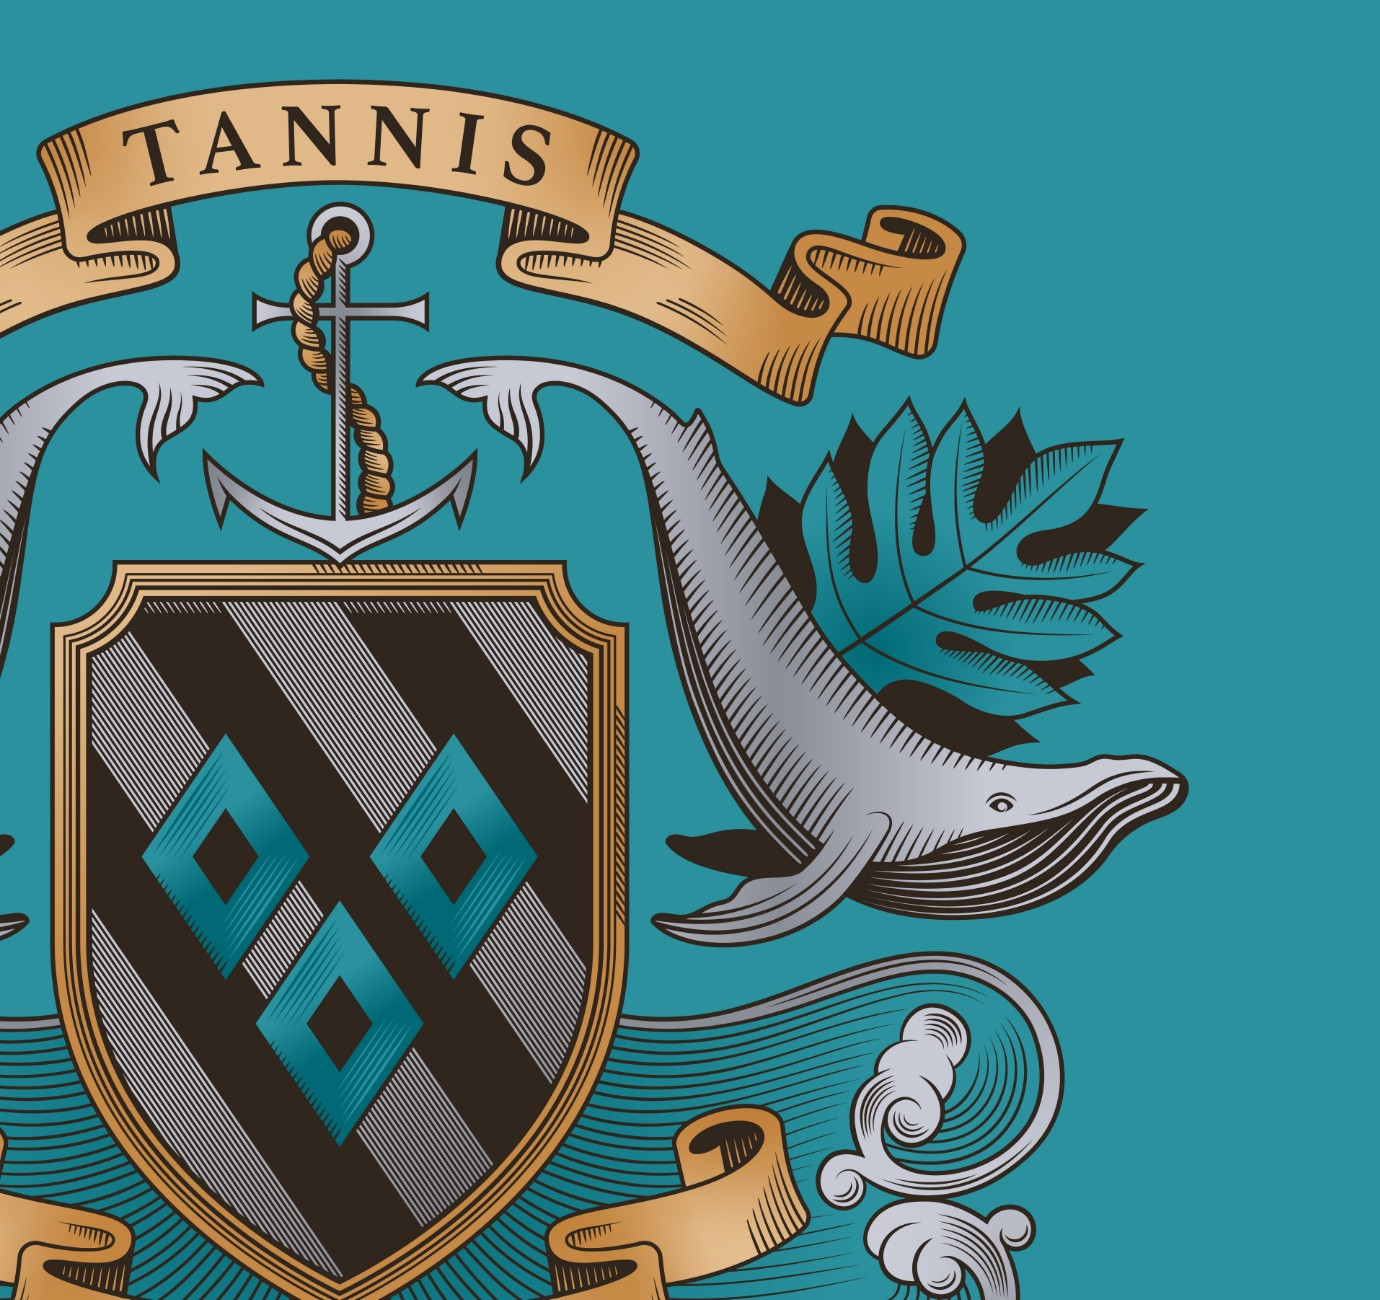 Tannis family crest design by Root Studio